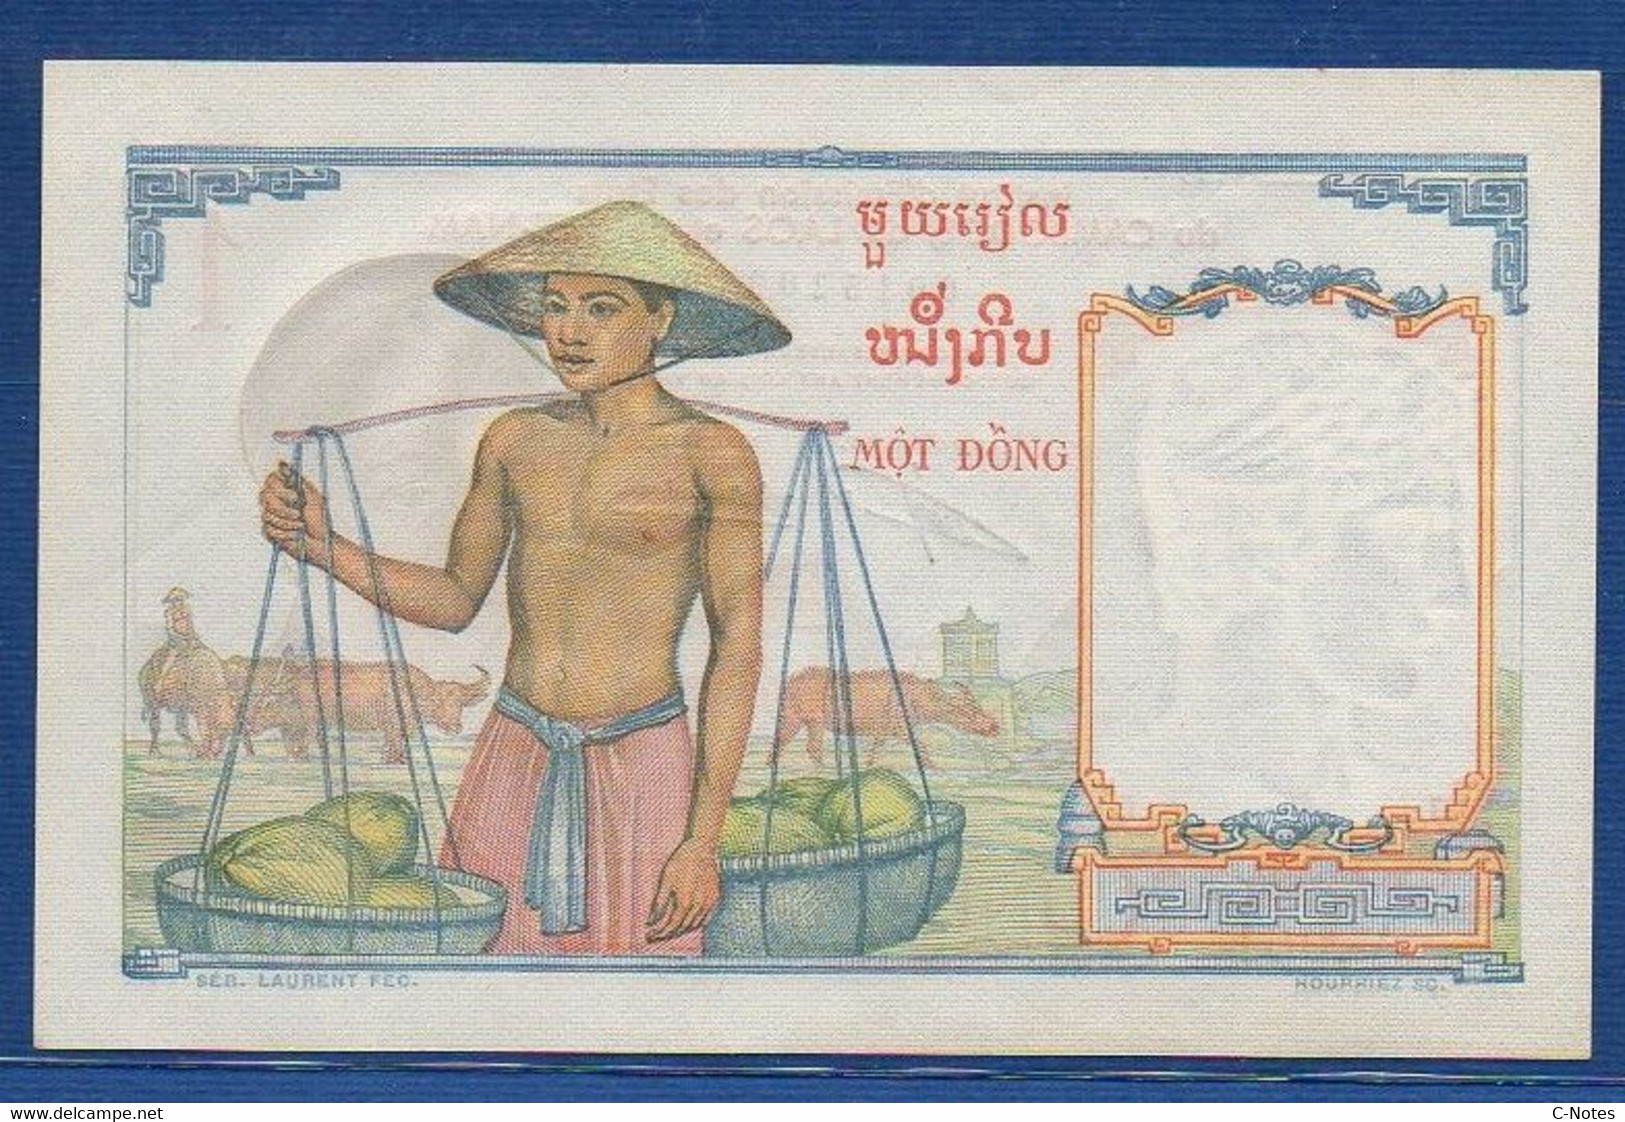 FRENCH INDOCHINA - P. 92 –  1 Piastre ND (1953) UNC-, S/n V.061 910 - Indochine